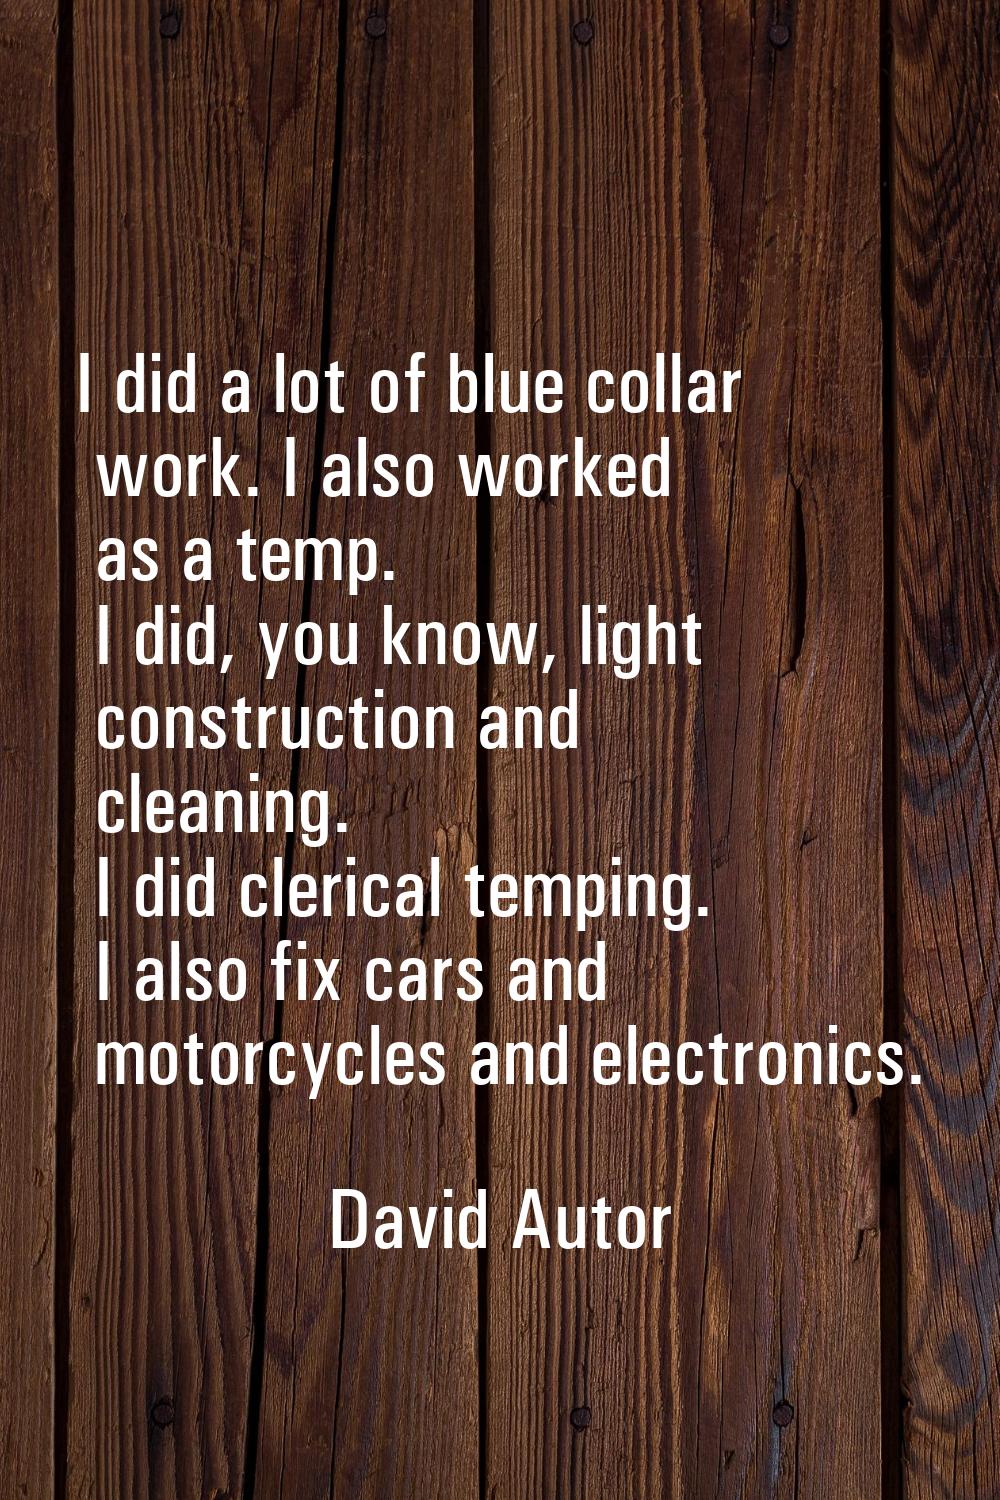 I did a lot of blue collar work. I also worked as a temp. I did, you know, light construction and c